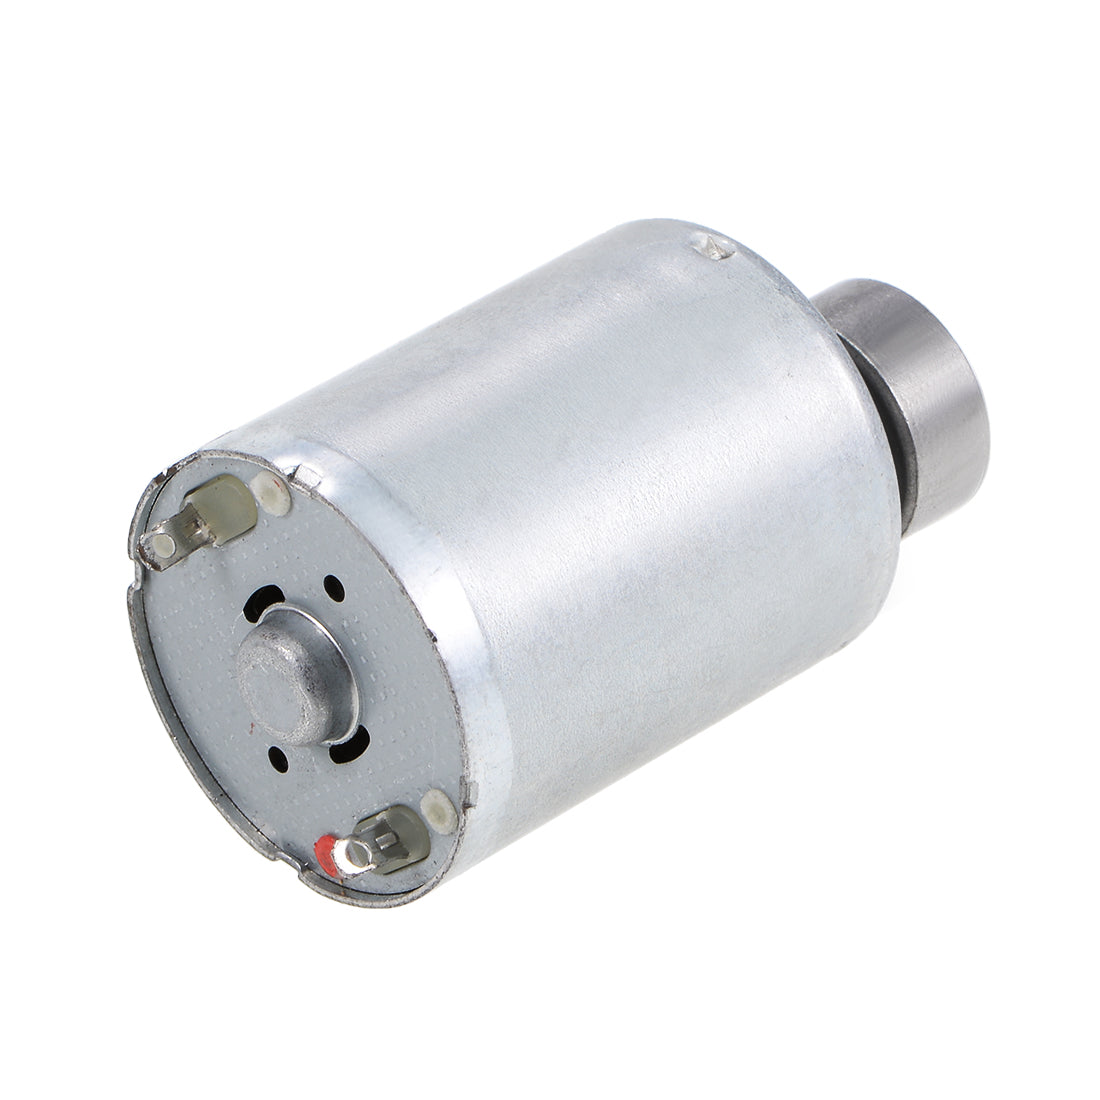 uxcell Uxcell Vibration Motors DC 12V 250mA 7500RPM Vibrating Motor Strong Power for DIY Electric  42x24mm 2Pcs